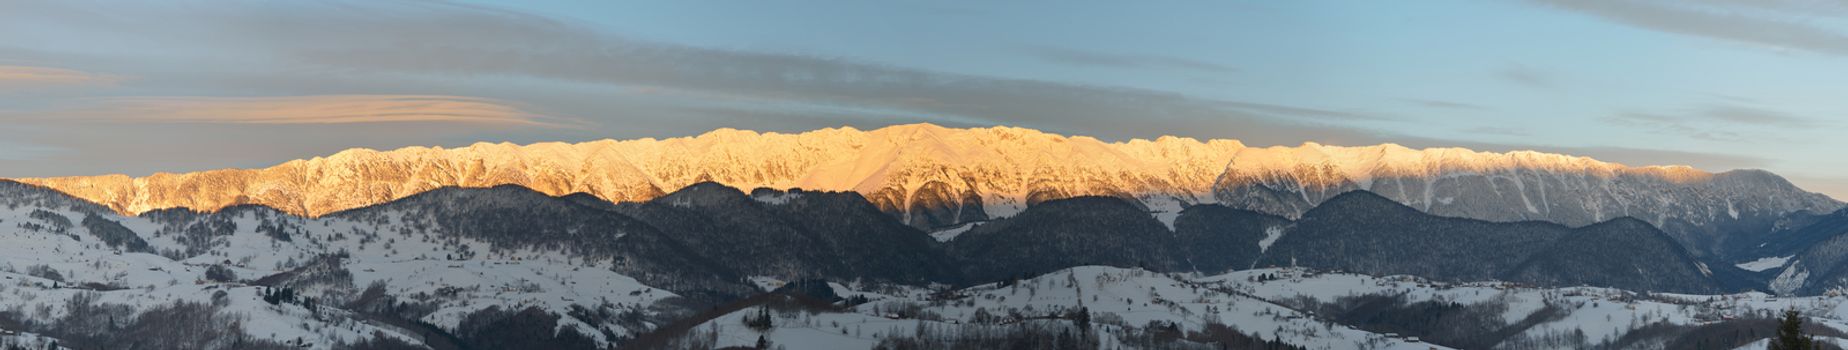 Alpine landscape with peaks covered by snow and clouds, view to Piatra Craiului mountains. Panorama view at sunrise.